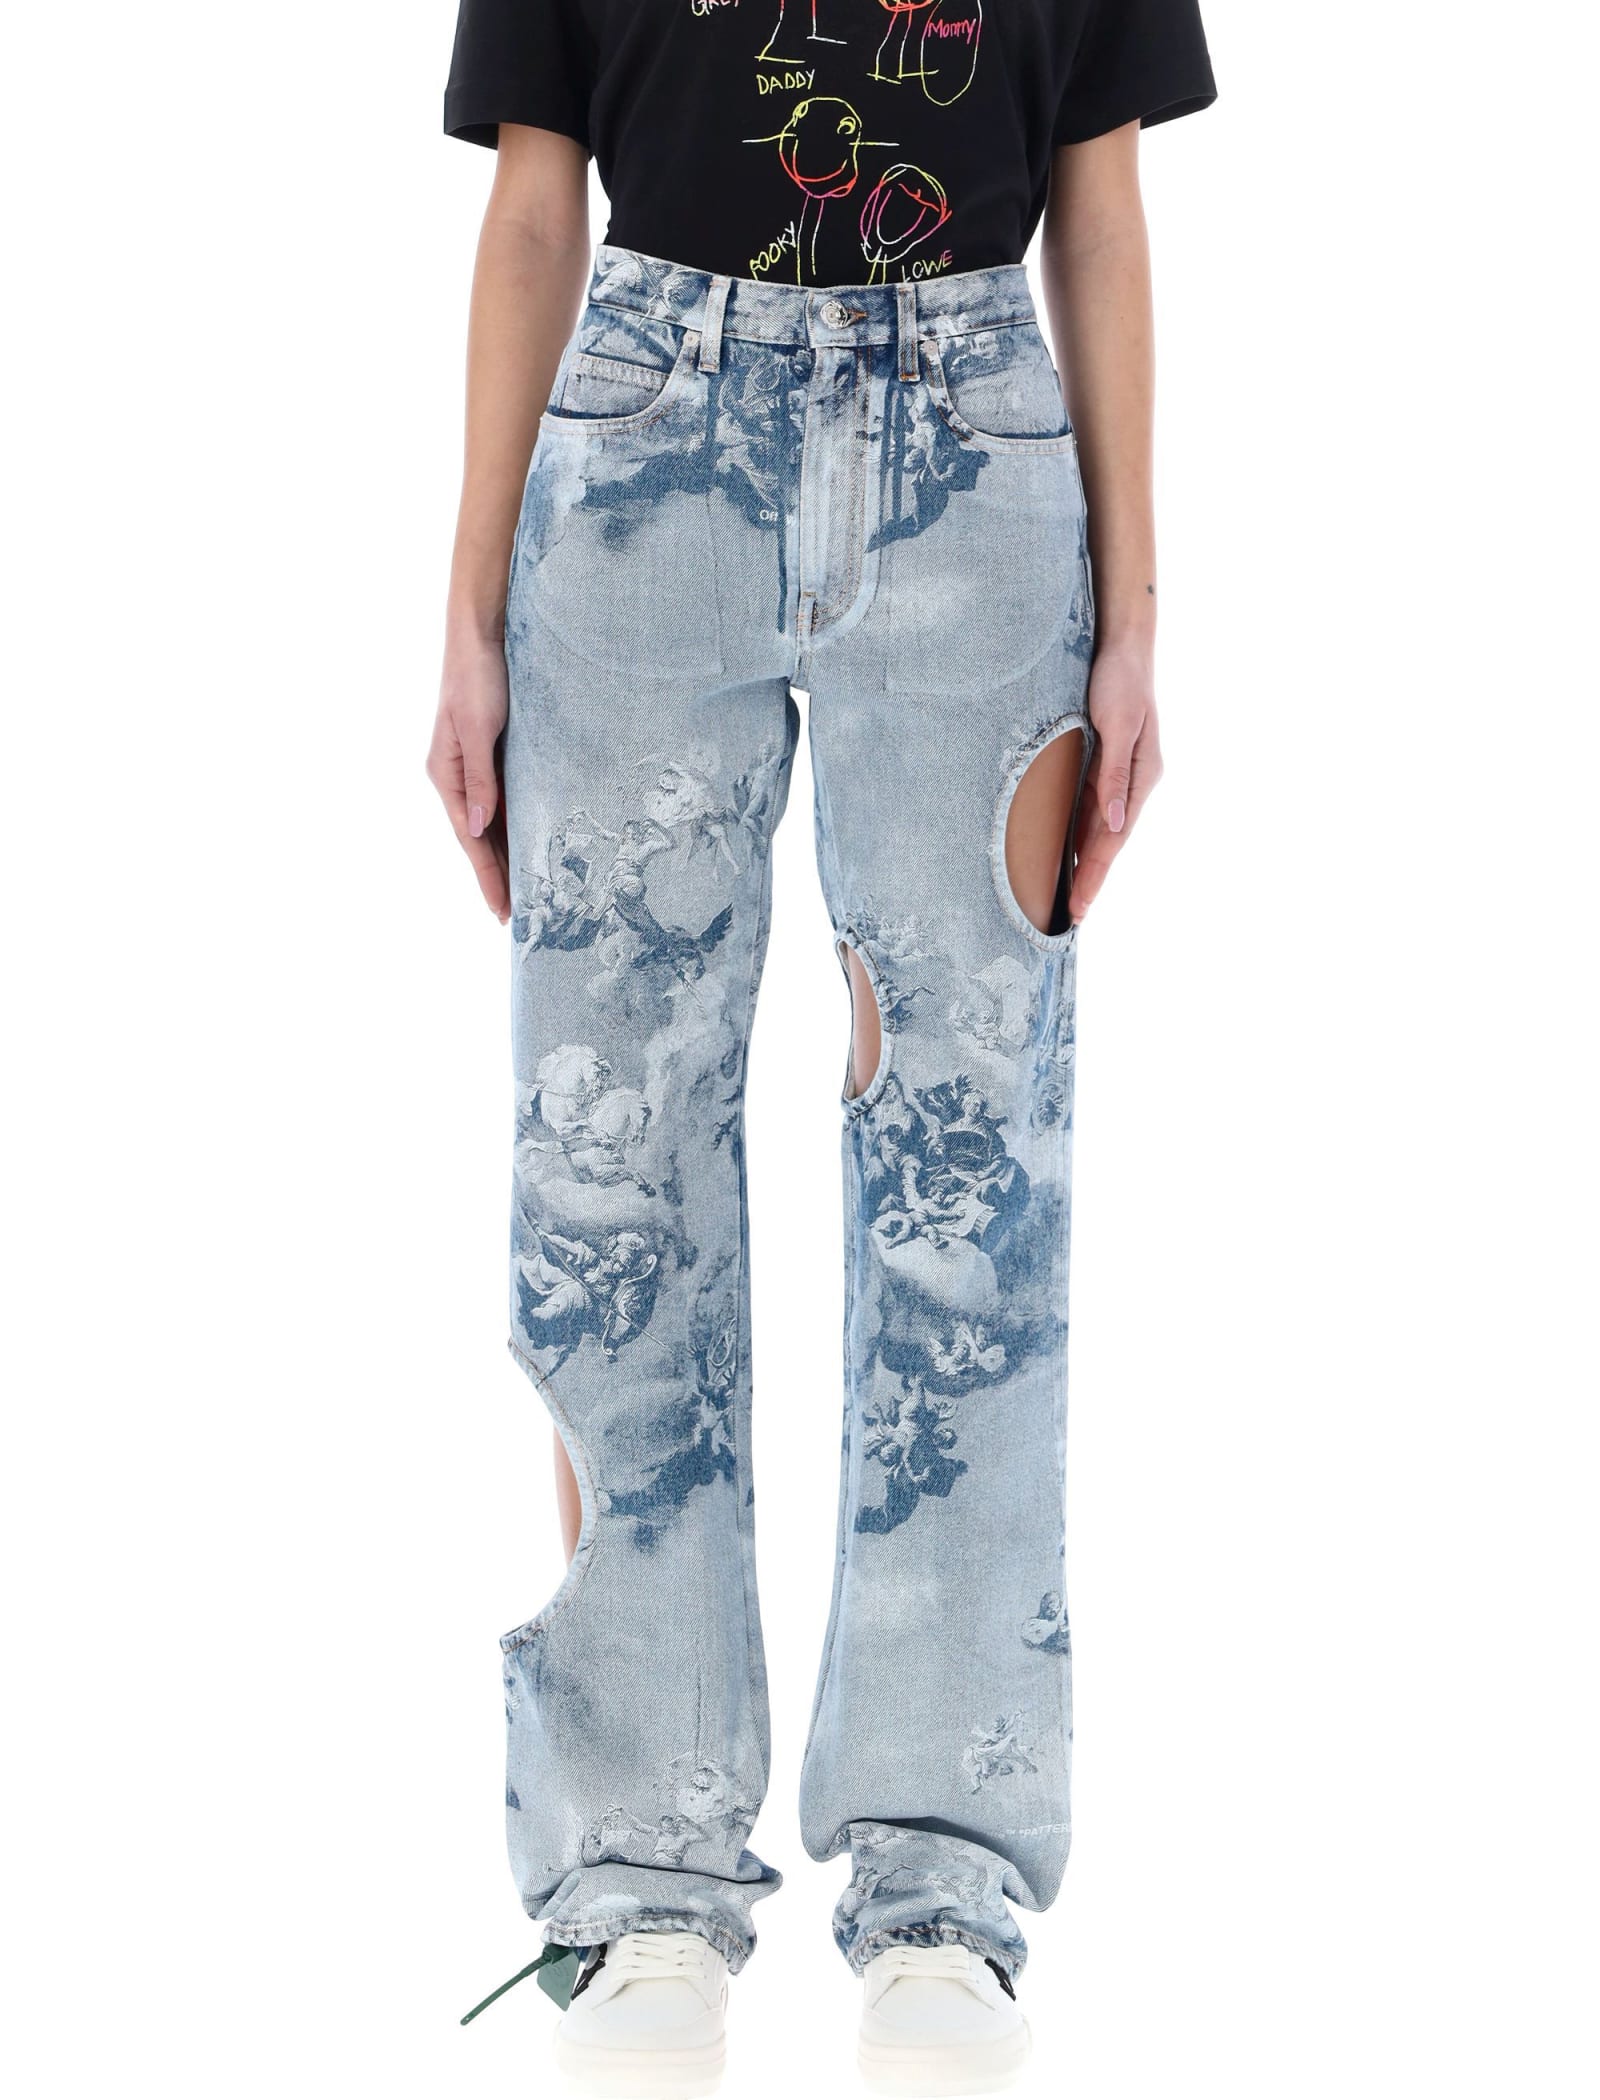 OFF-WHITE SKY METEOR COOL BAGGY JEANS